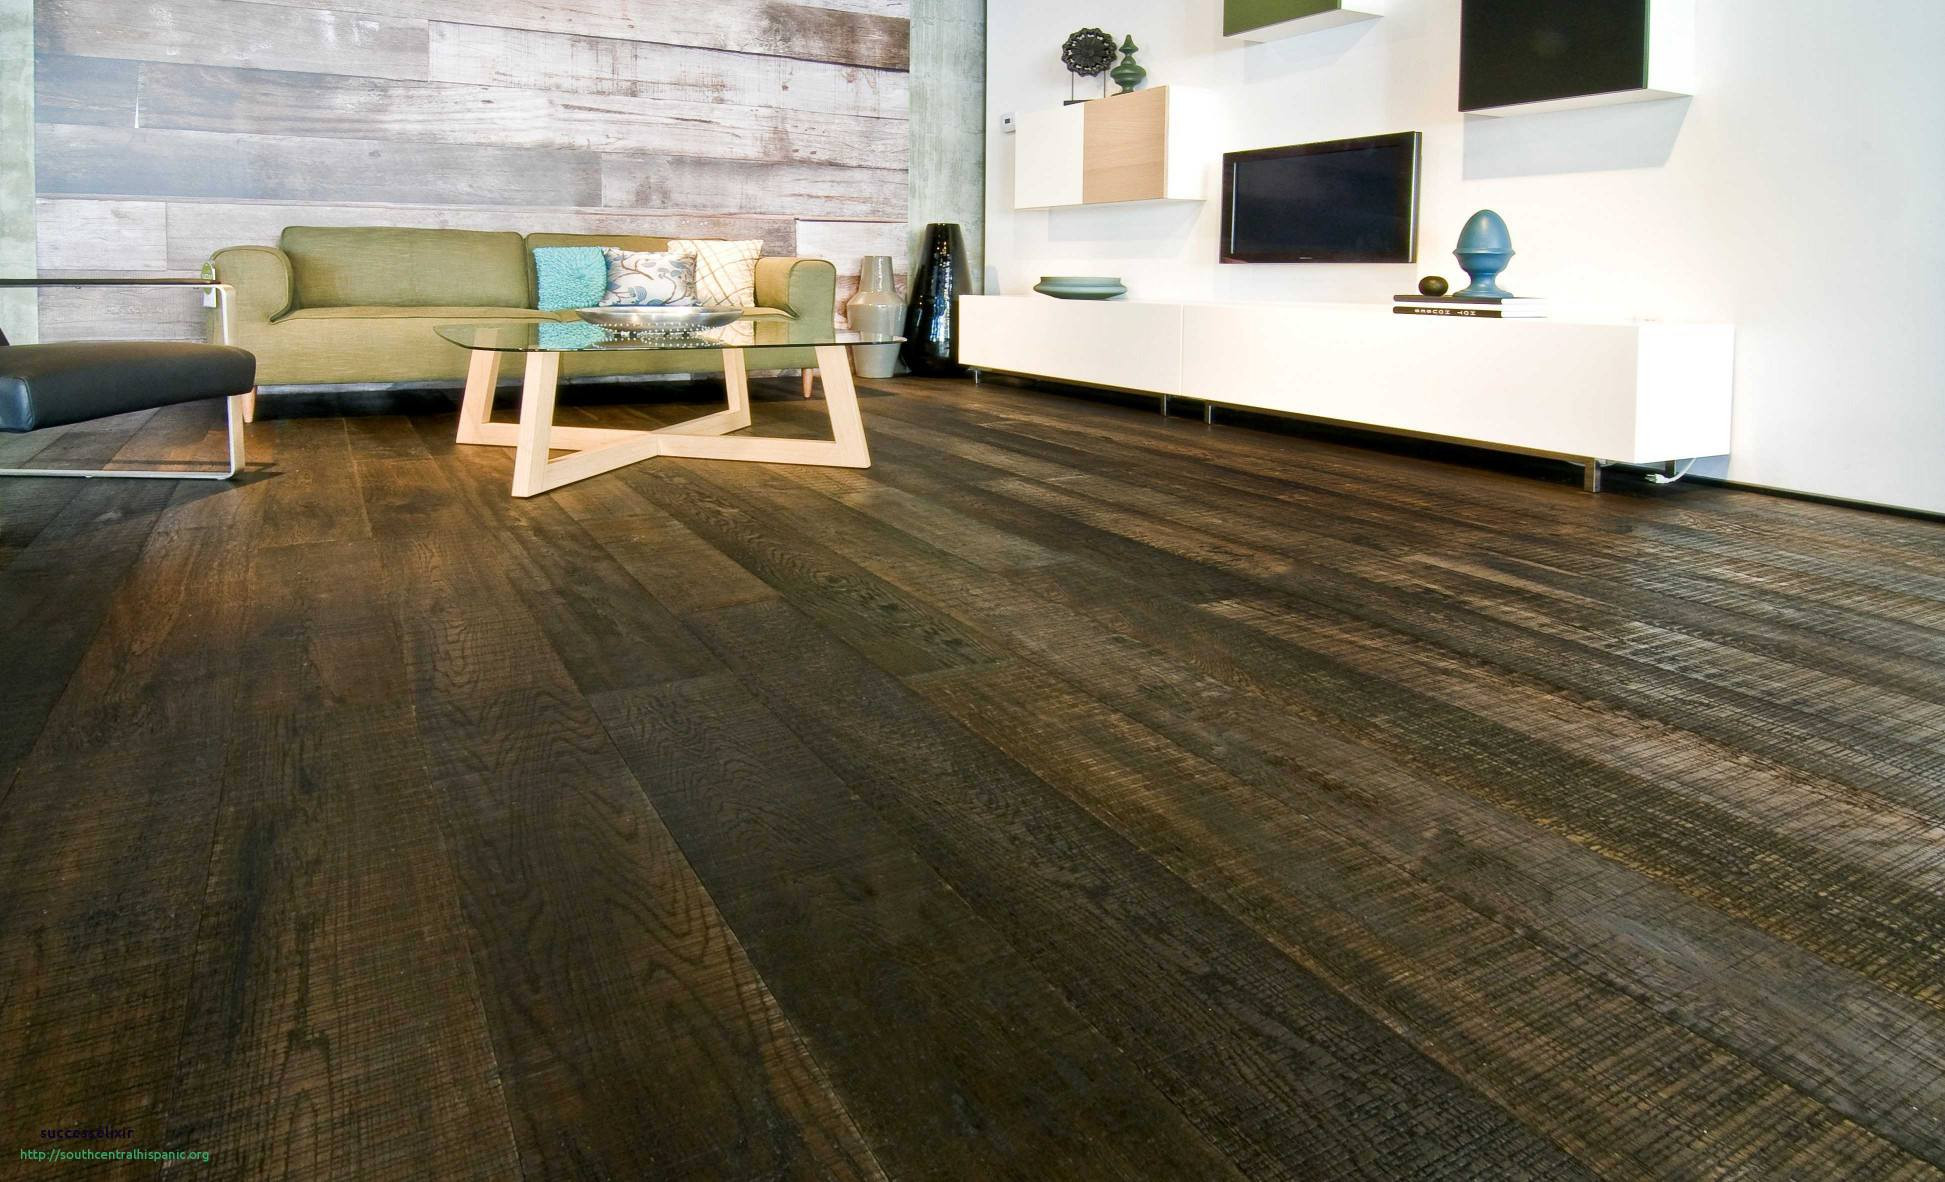 17 Lovable Cost Of Hardwood Flooring Canada 2024 free download cost of hardwood flooring canada of more best price hardwood flooring toronto on a budget best intended for best place to buy laminate flooring beau engaging discount hardwood flooring 5 whe